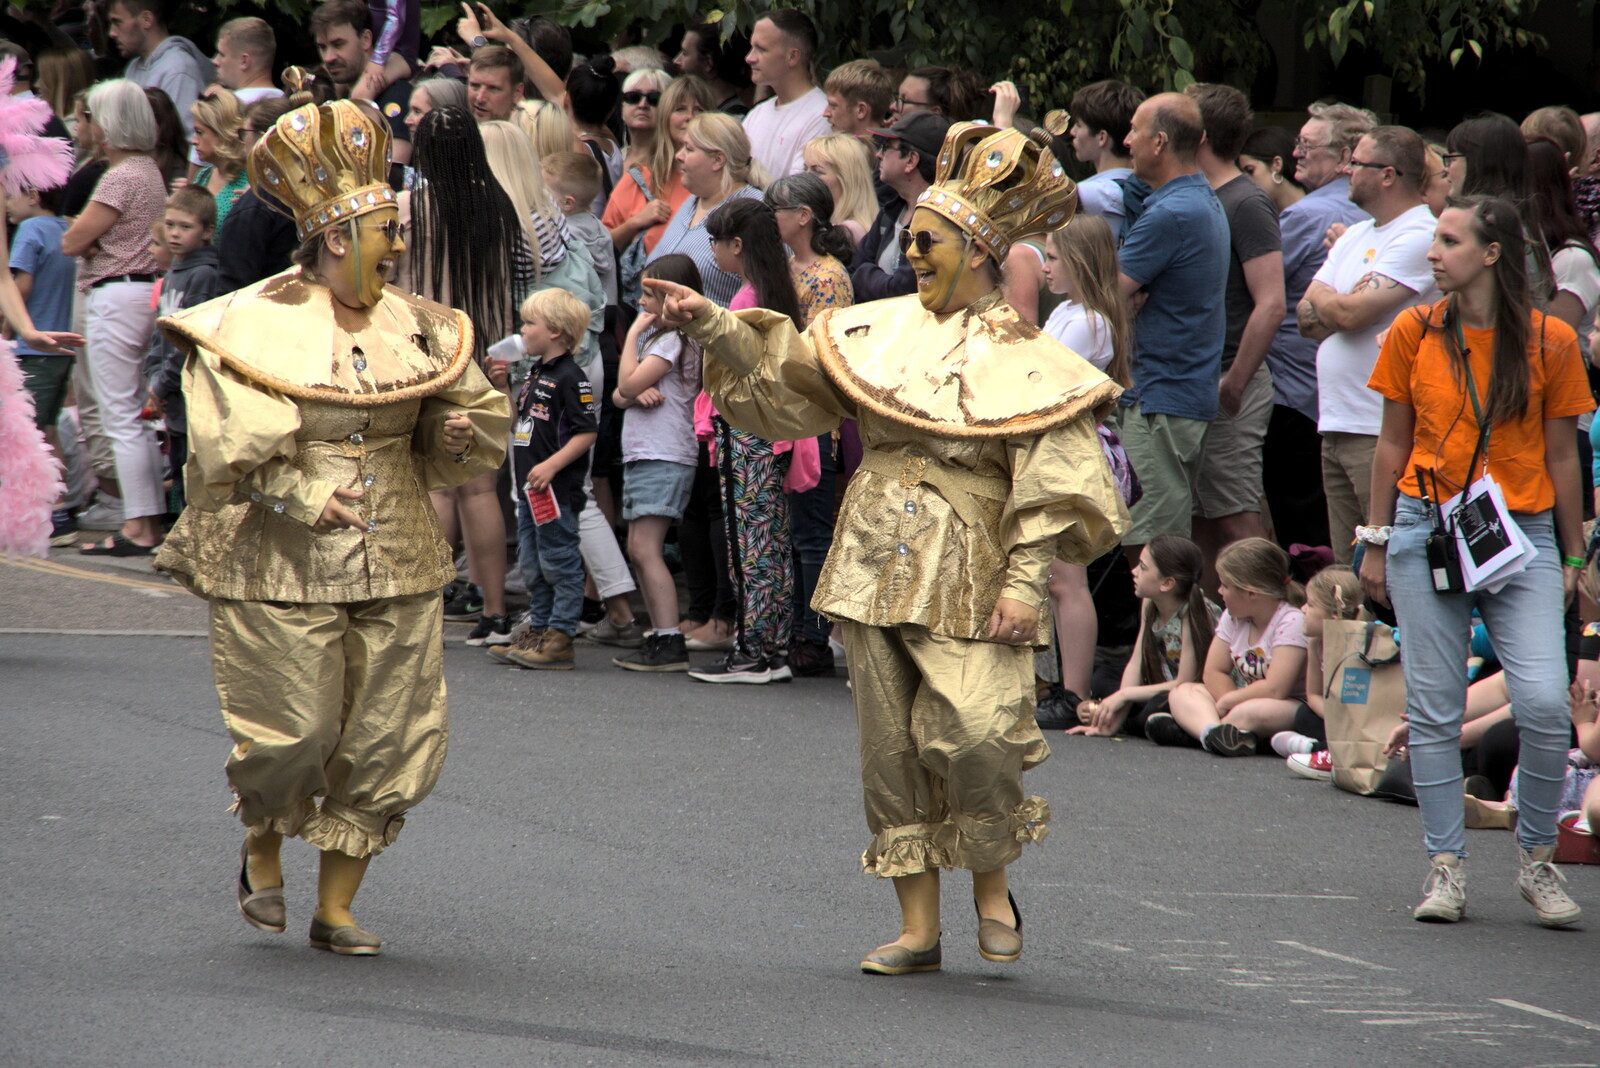 All-gold costumes in the parade from The Lord Mayor's Procession, Norwich, Norfolk - 2nd July 2022